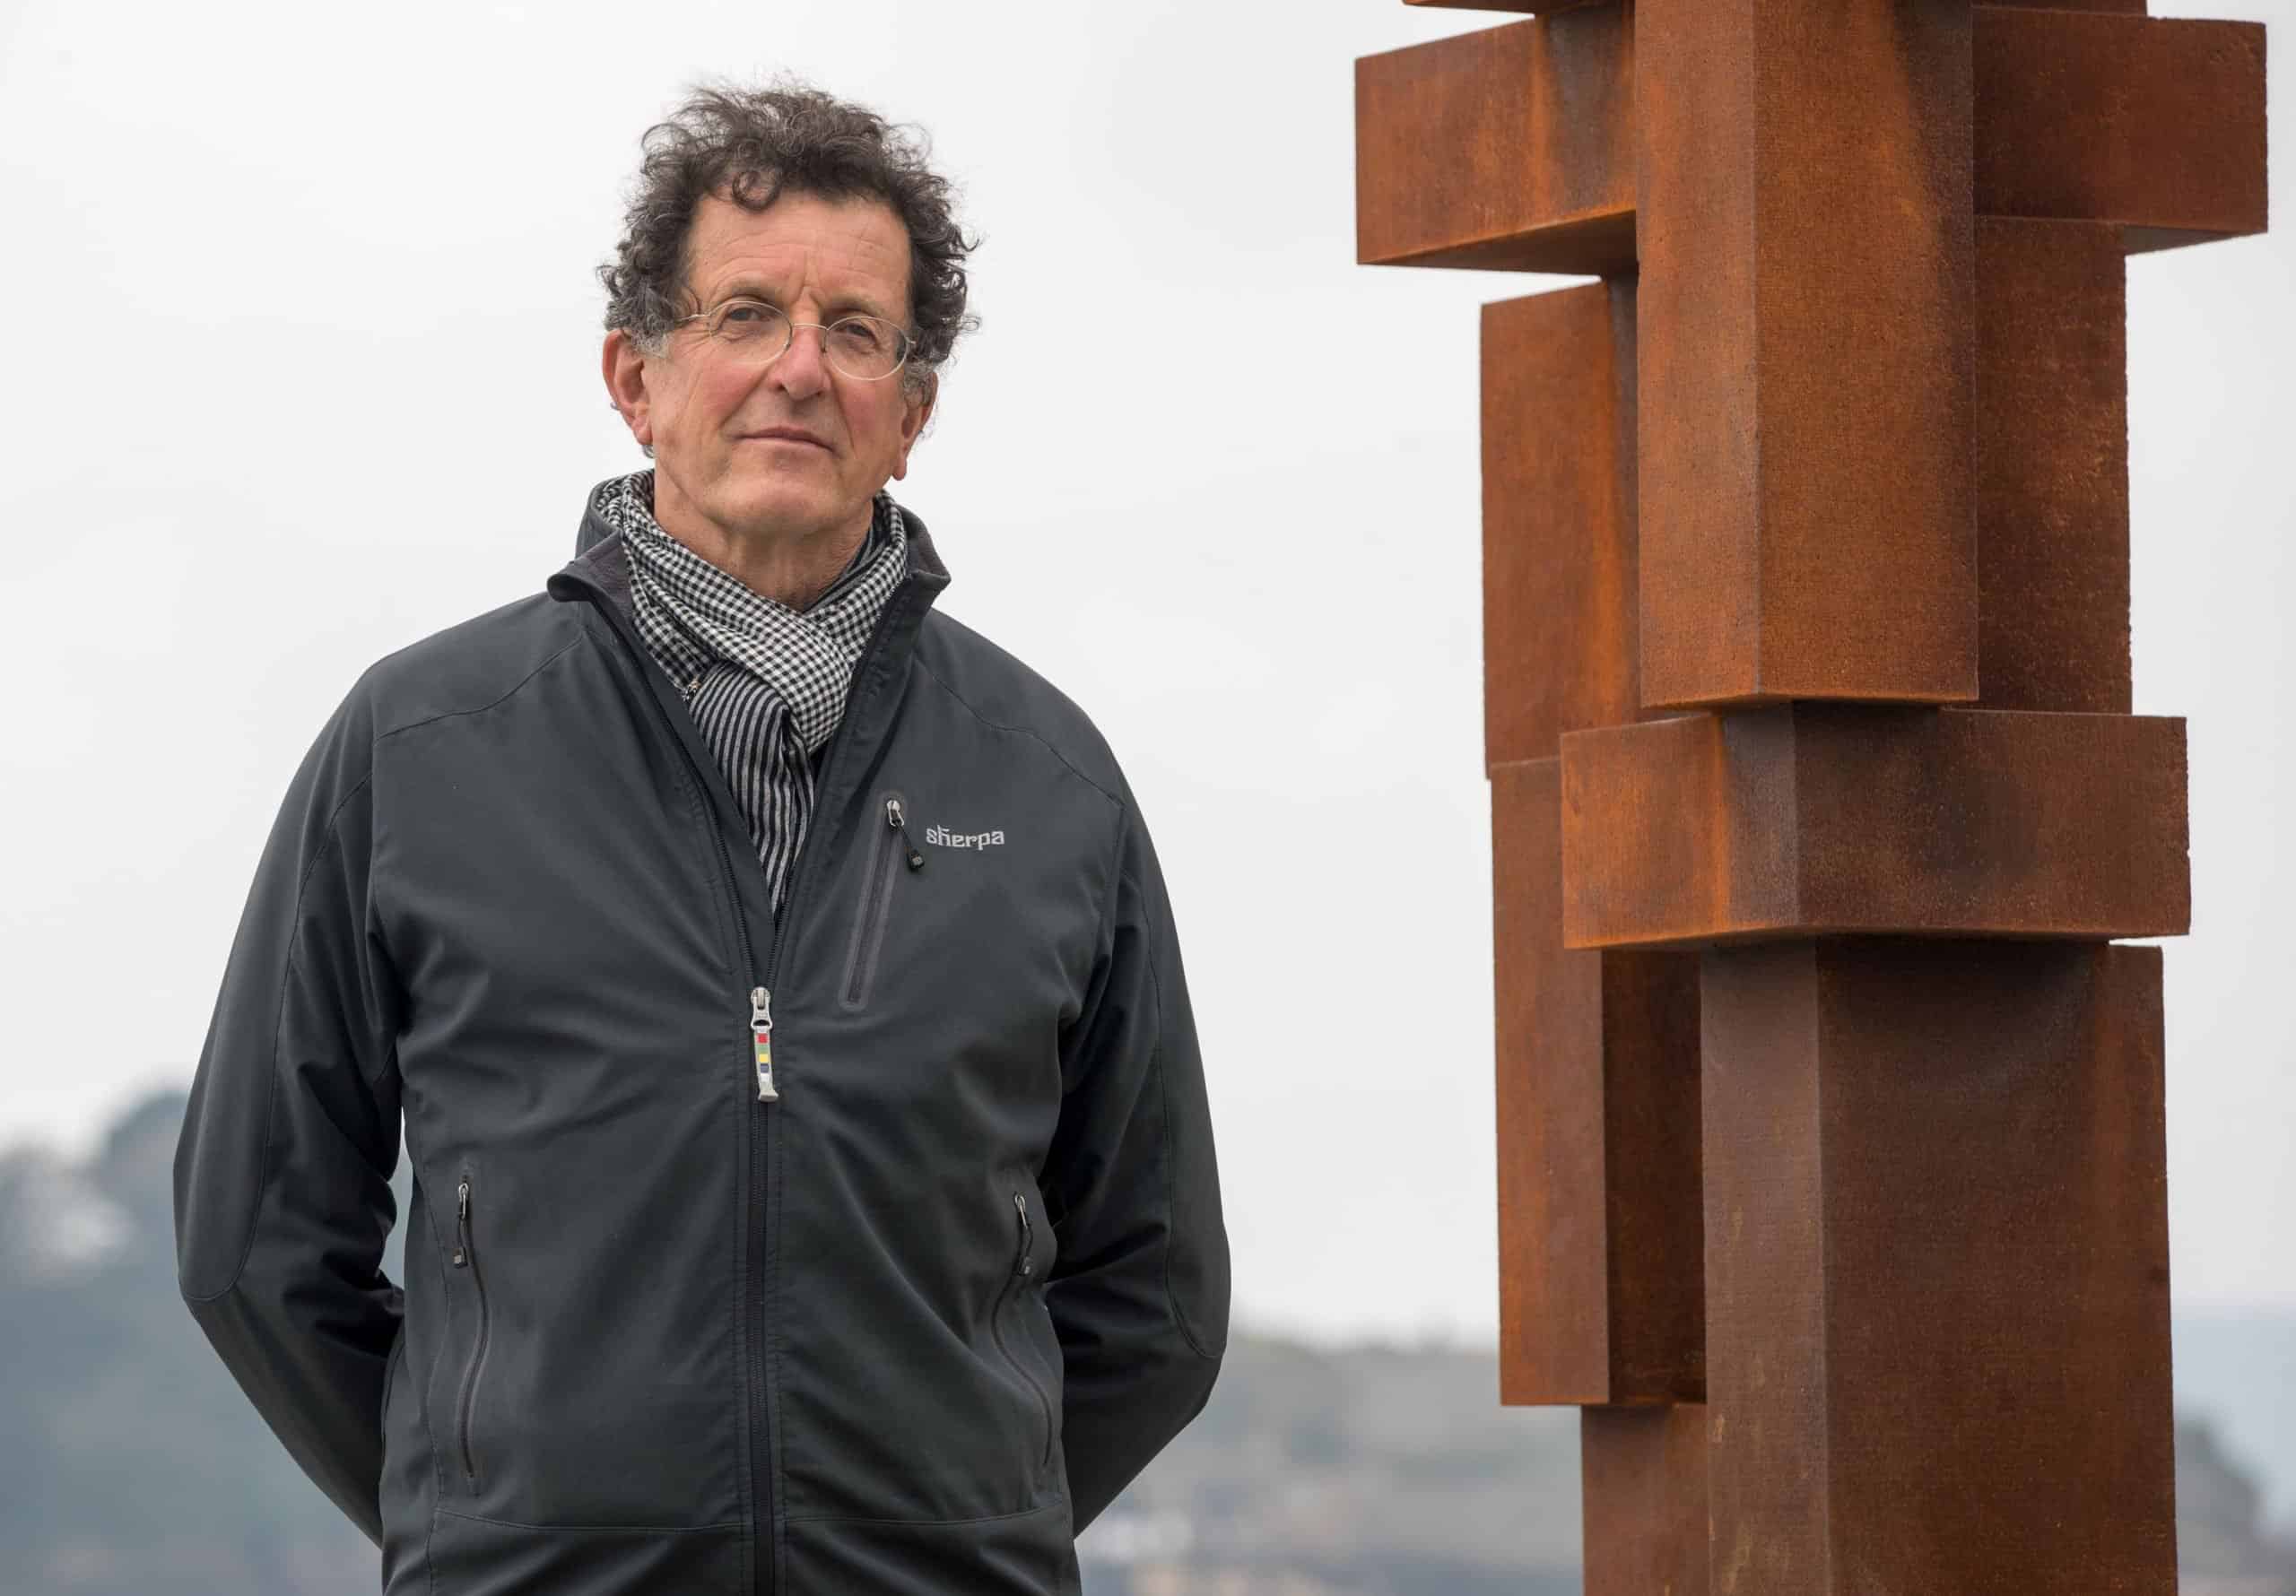 Angel of the North sculptor dubs Brexit the ‘biggest act of self-harm’ in British history